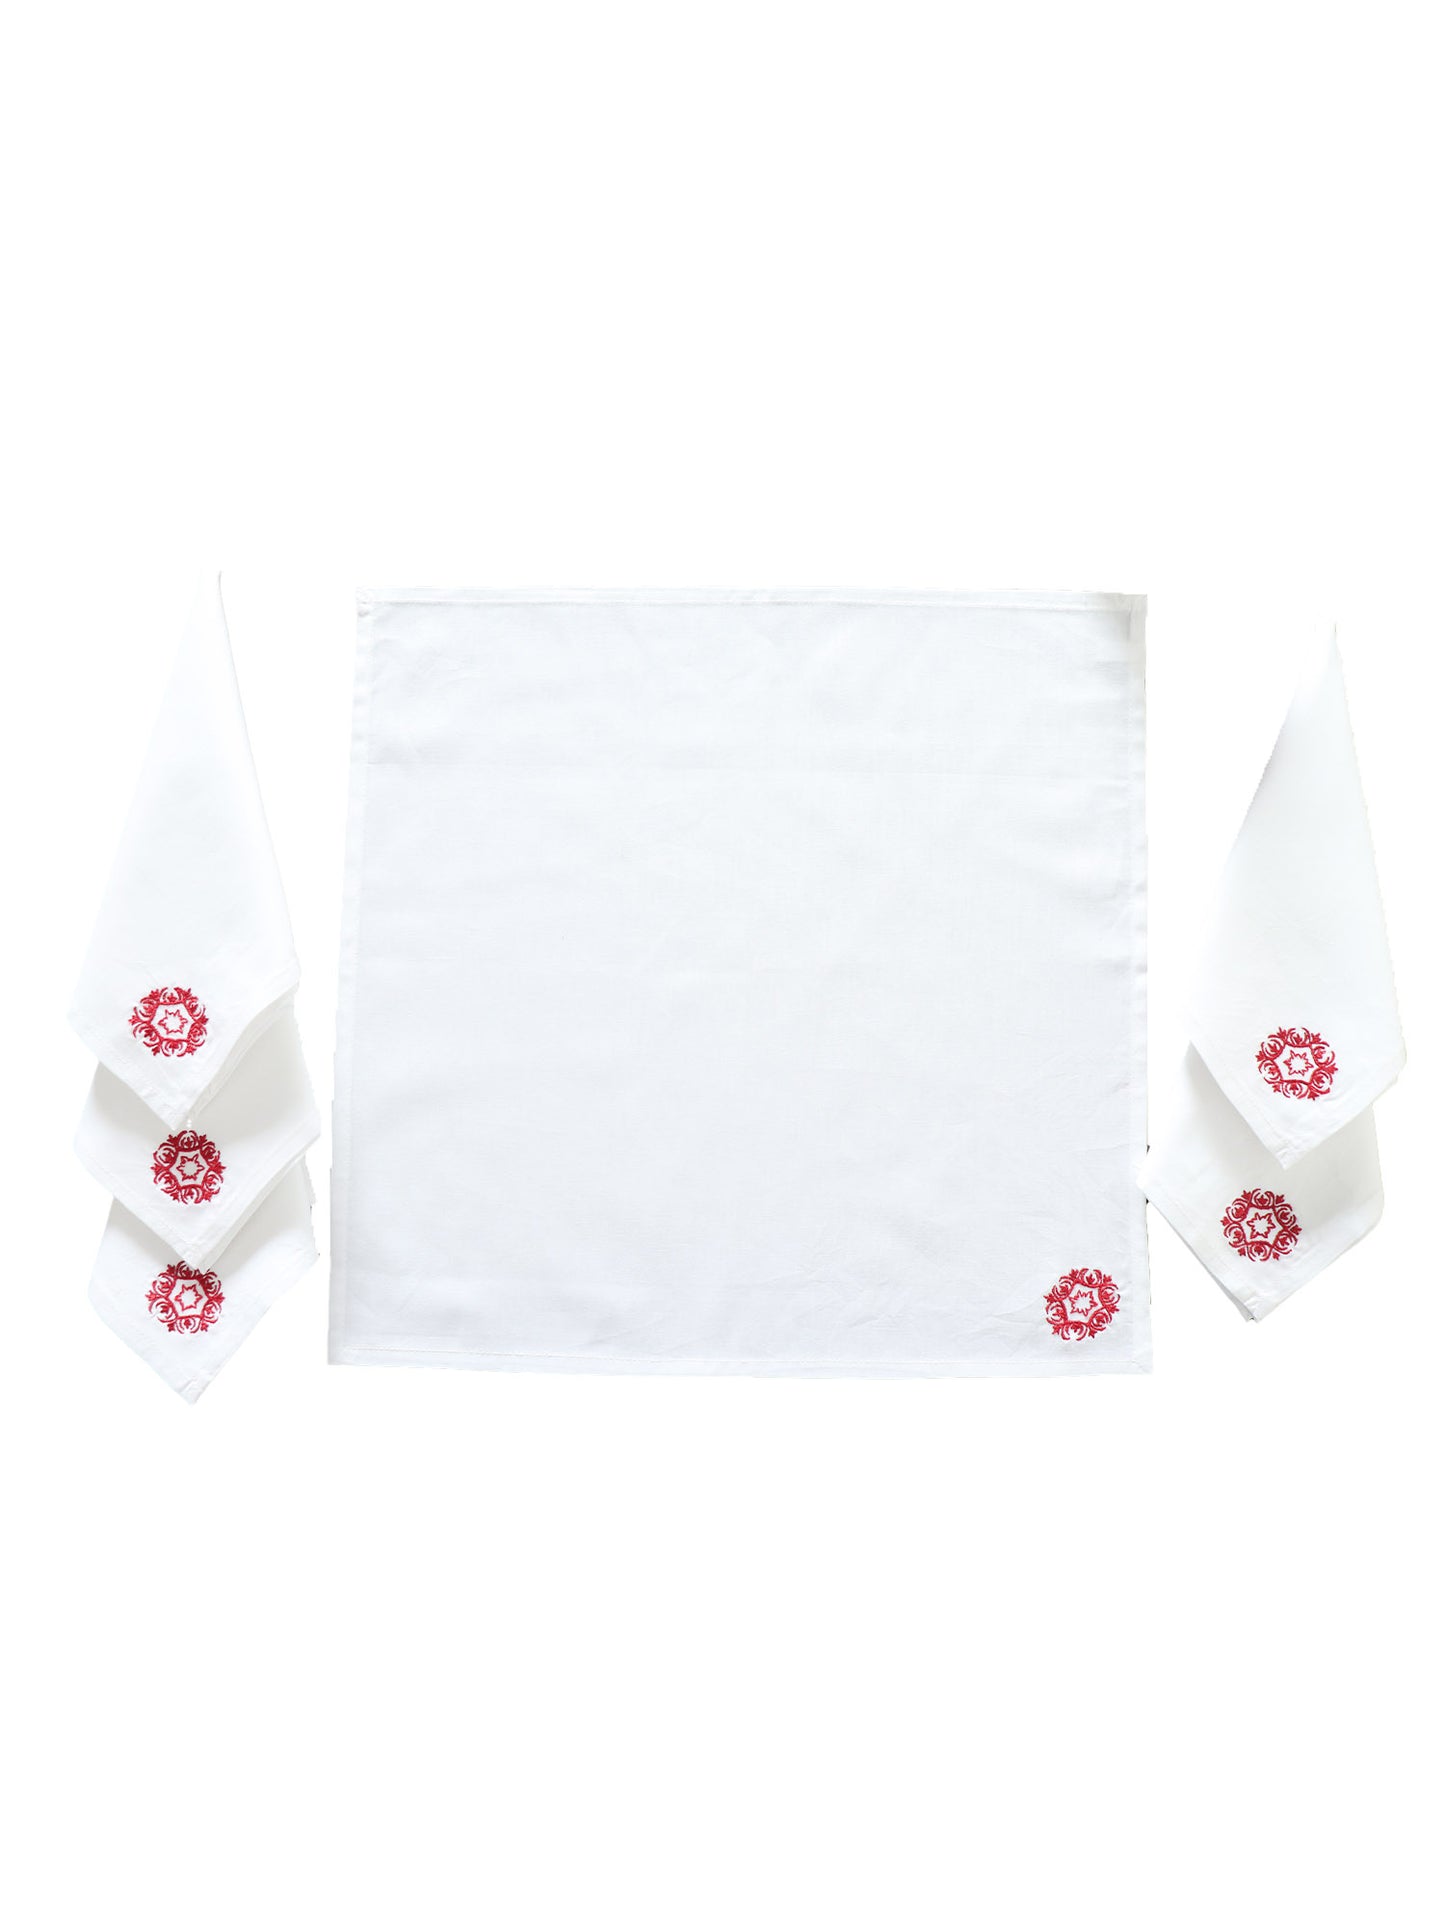 motif embroidered in red color on white colored set of 6 dinner napkins - 16x16 inch